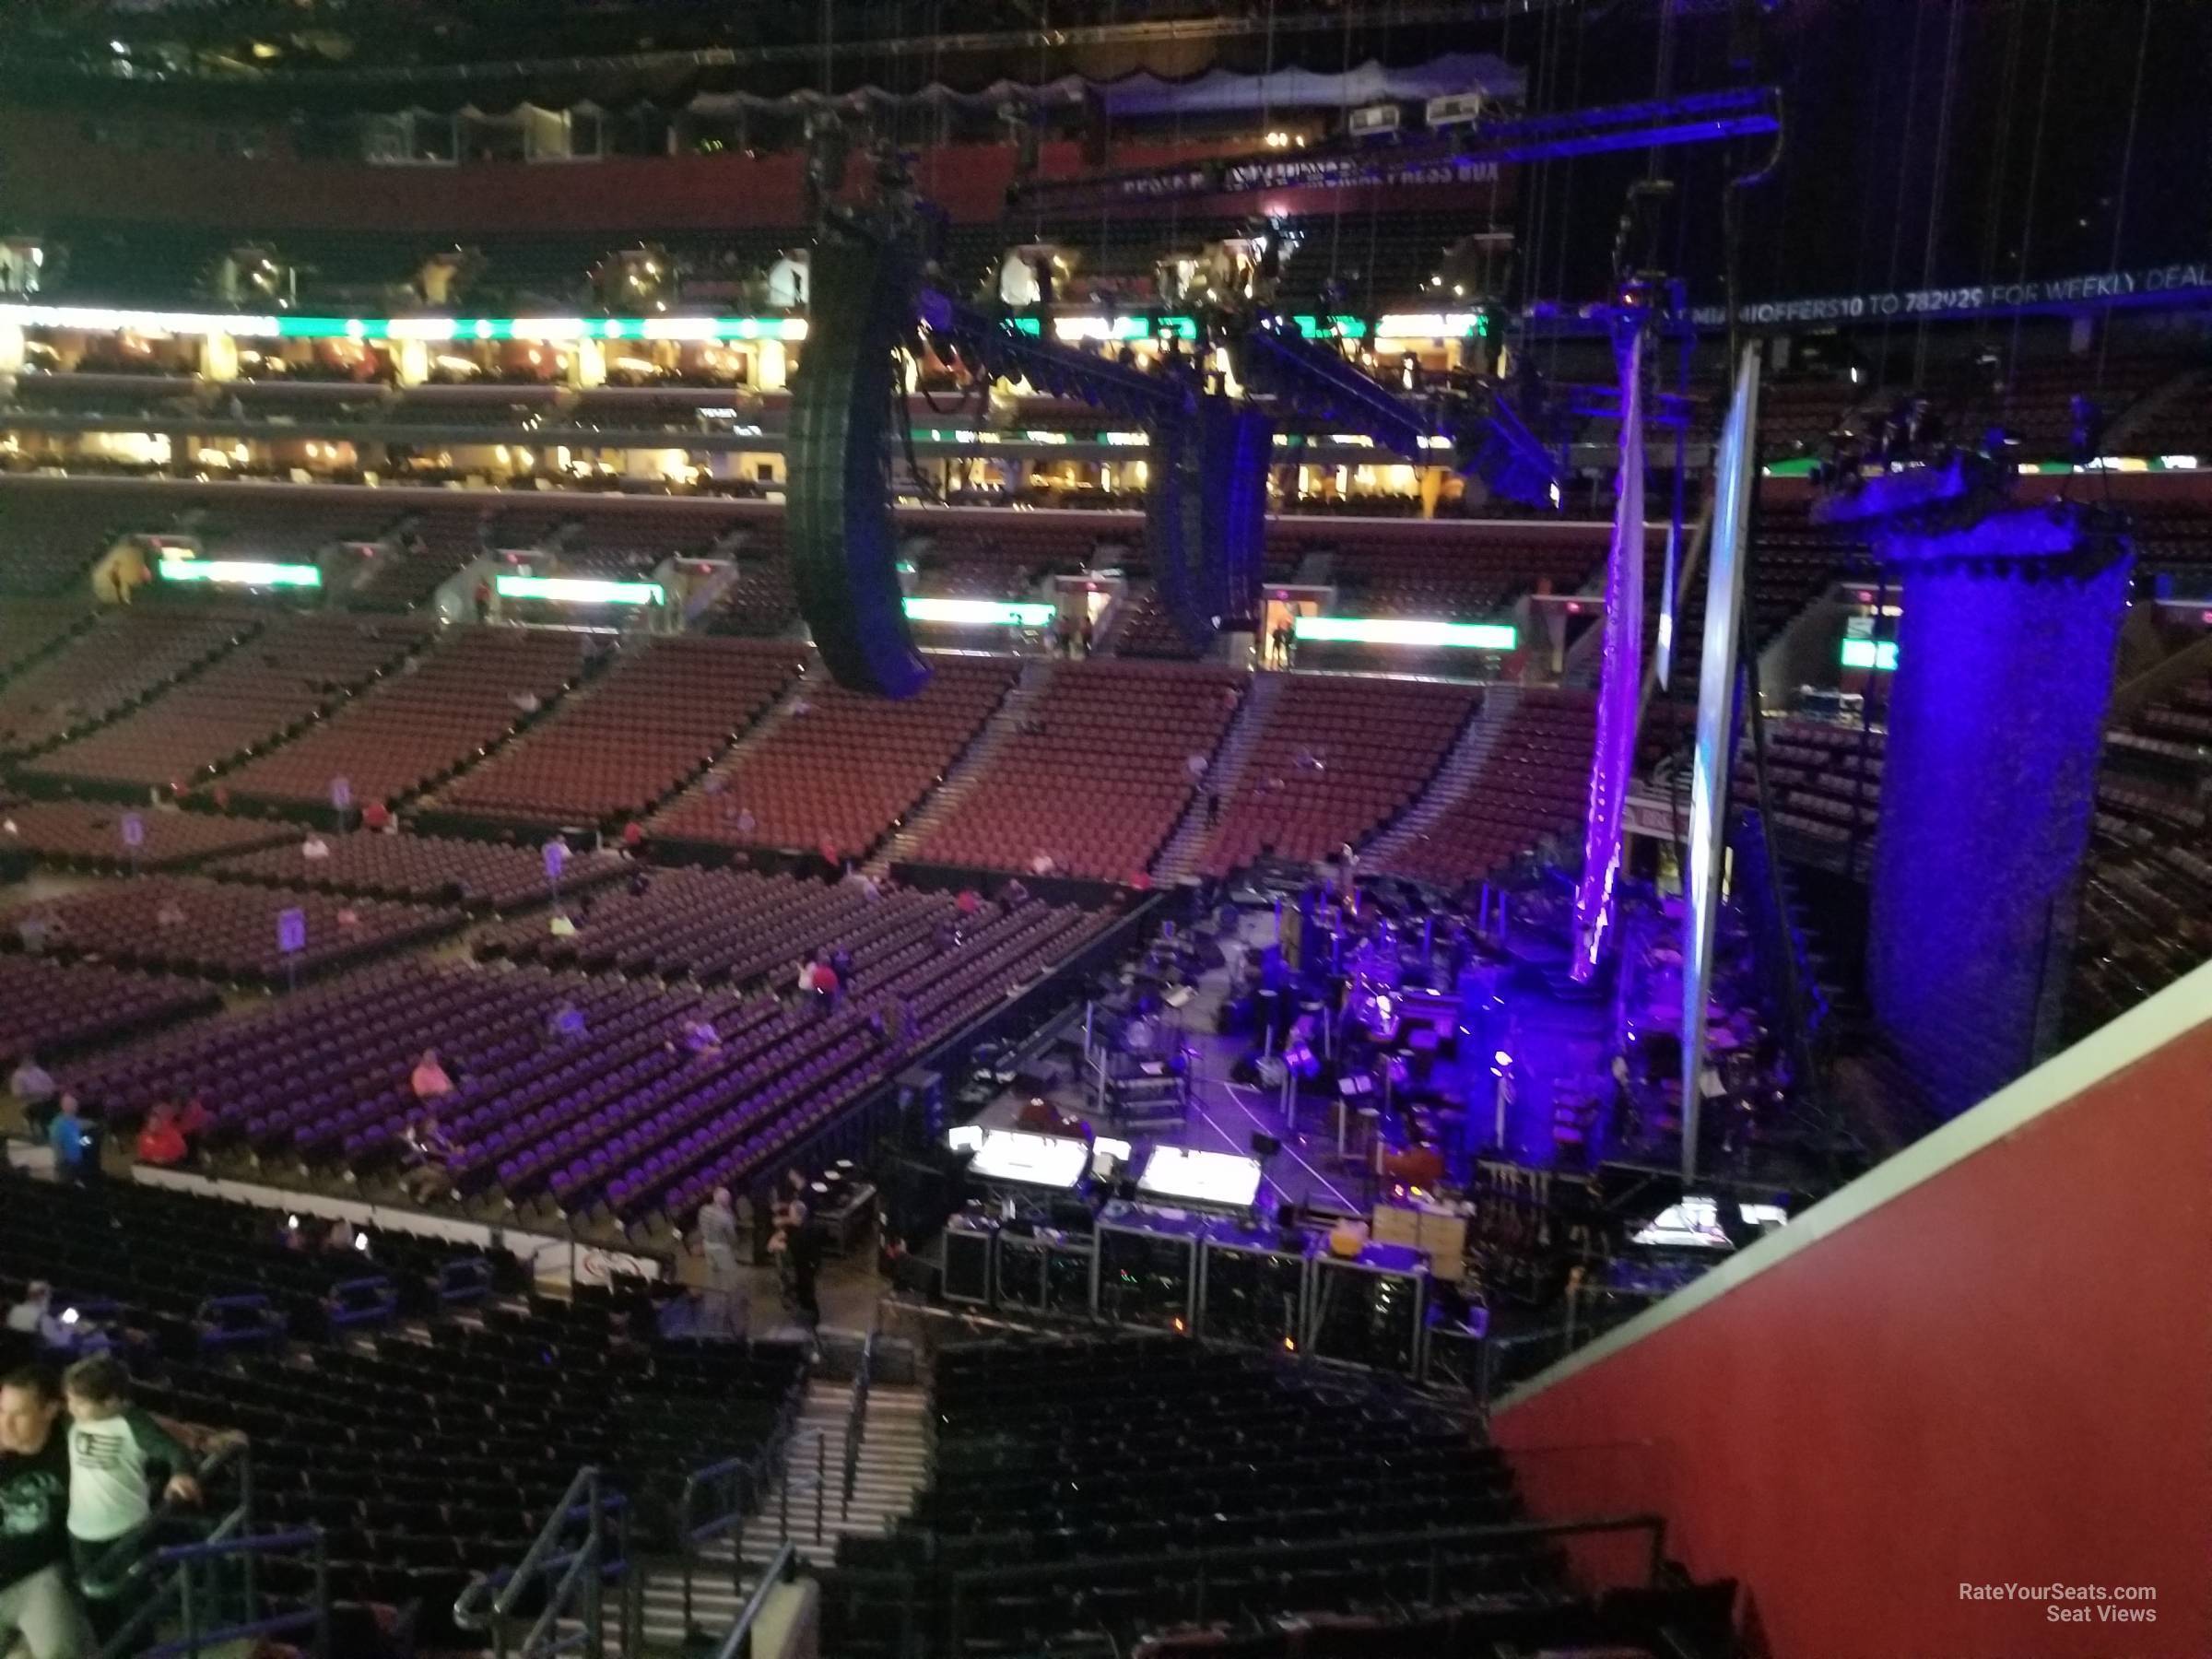 Section 131 at BB&T Center for Concerts